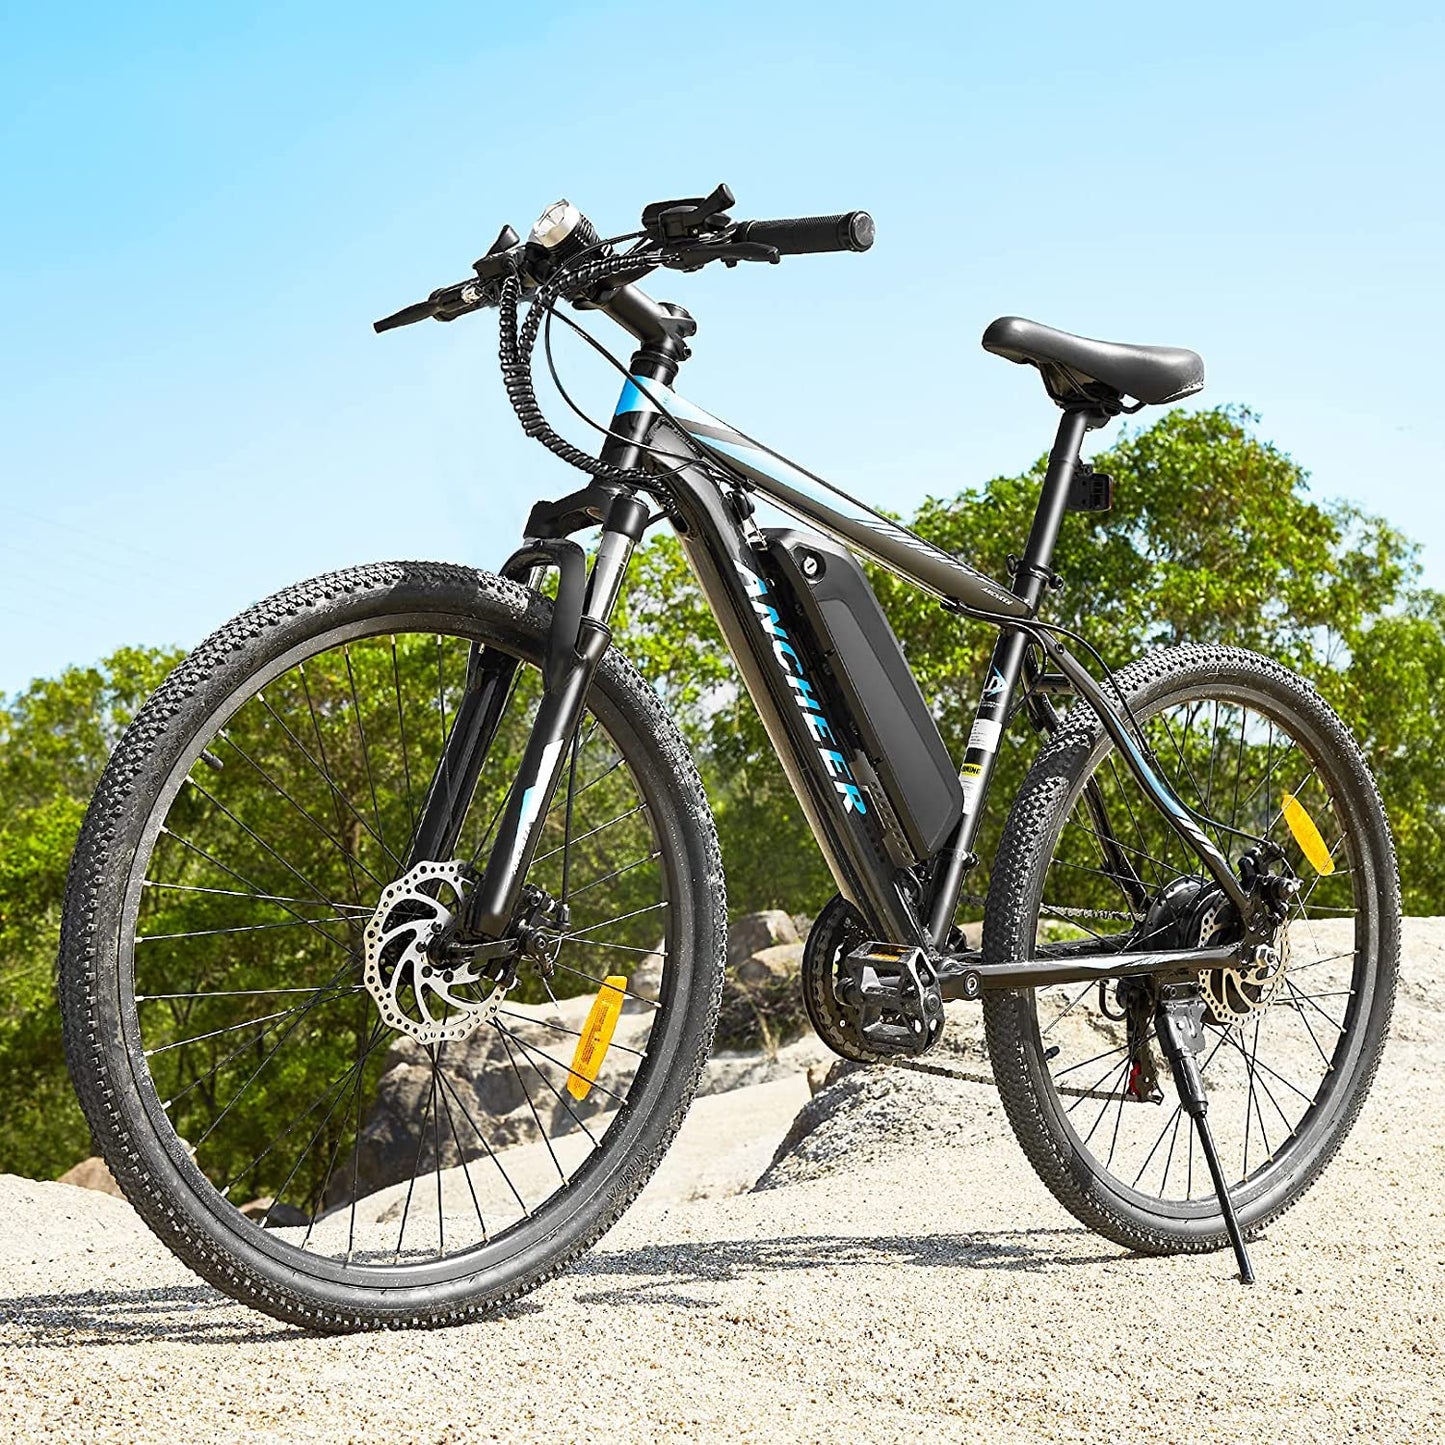 ANCHEER Electric Bike for Adults Electric Mountain Bike 500W 26'' Commuter Ebike, 50 Miles 20MPH Electric Bicycle with Removable 48V/374Wh Battery, LCD-Display, 21 Speed, Lockable Suspension Fork